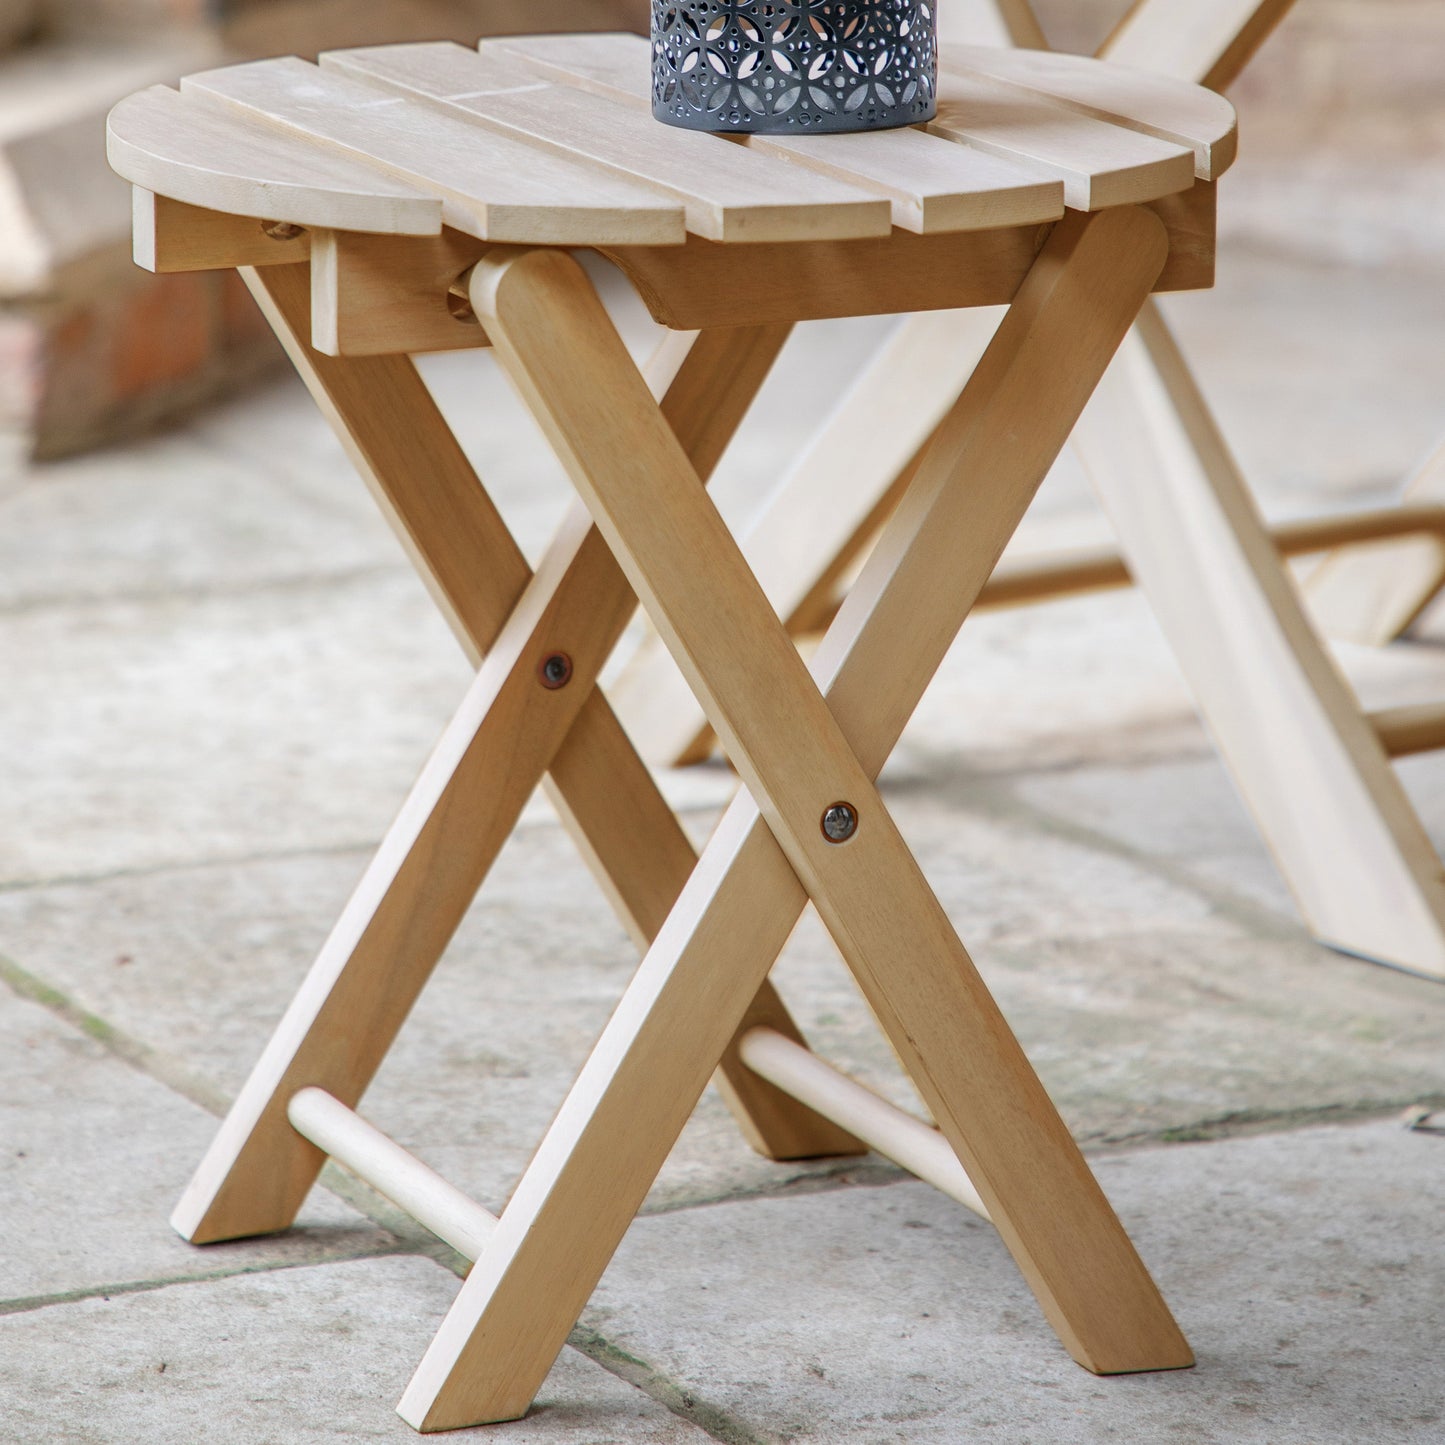 A Chillington Side Table, part of the home furniture collection at Kikiathome.co.uk, complements interior decor beautifully with a candle adorning its surface.